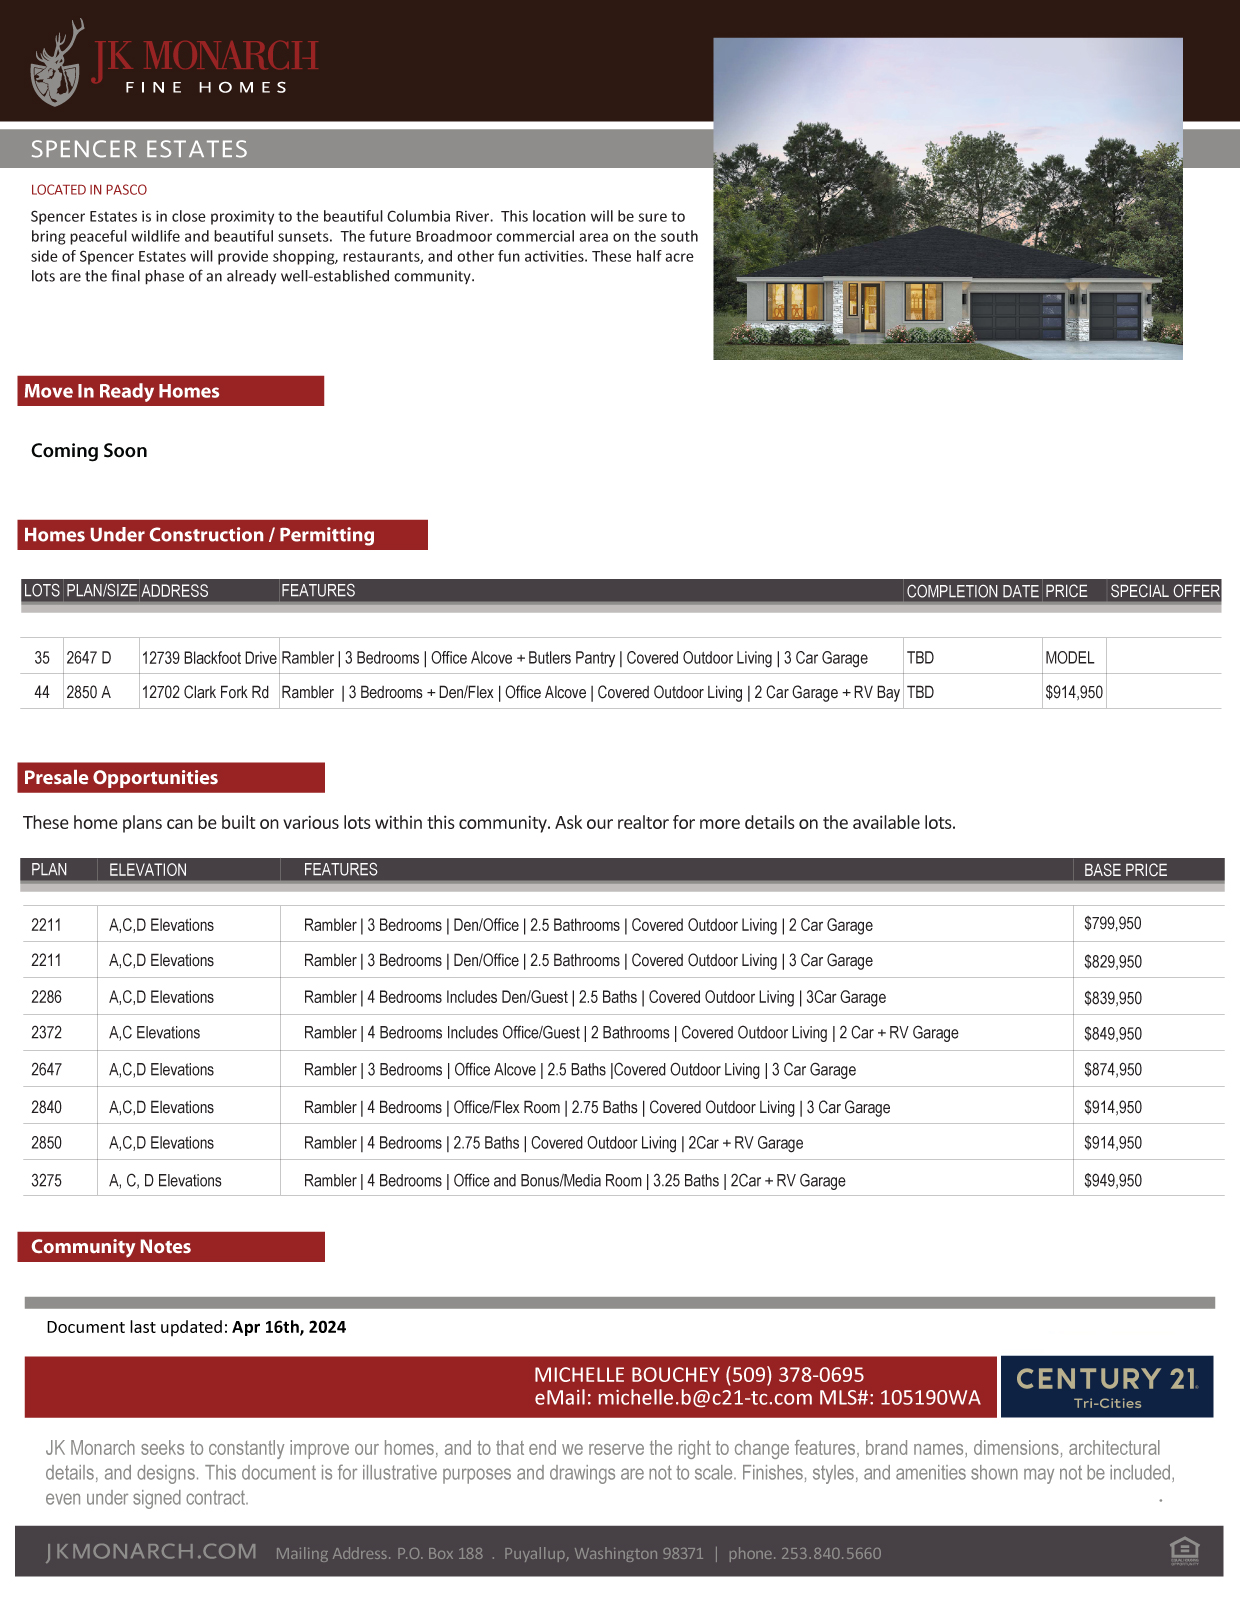 South Hill Estates Inventory